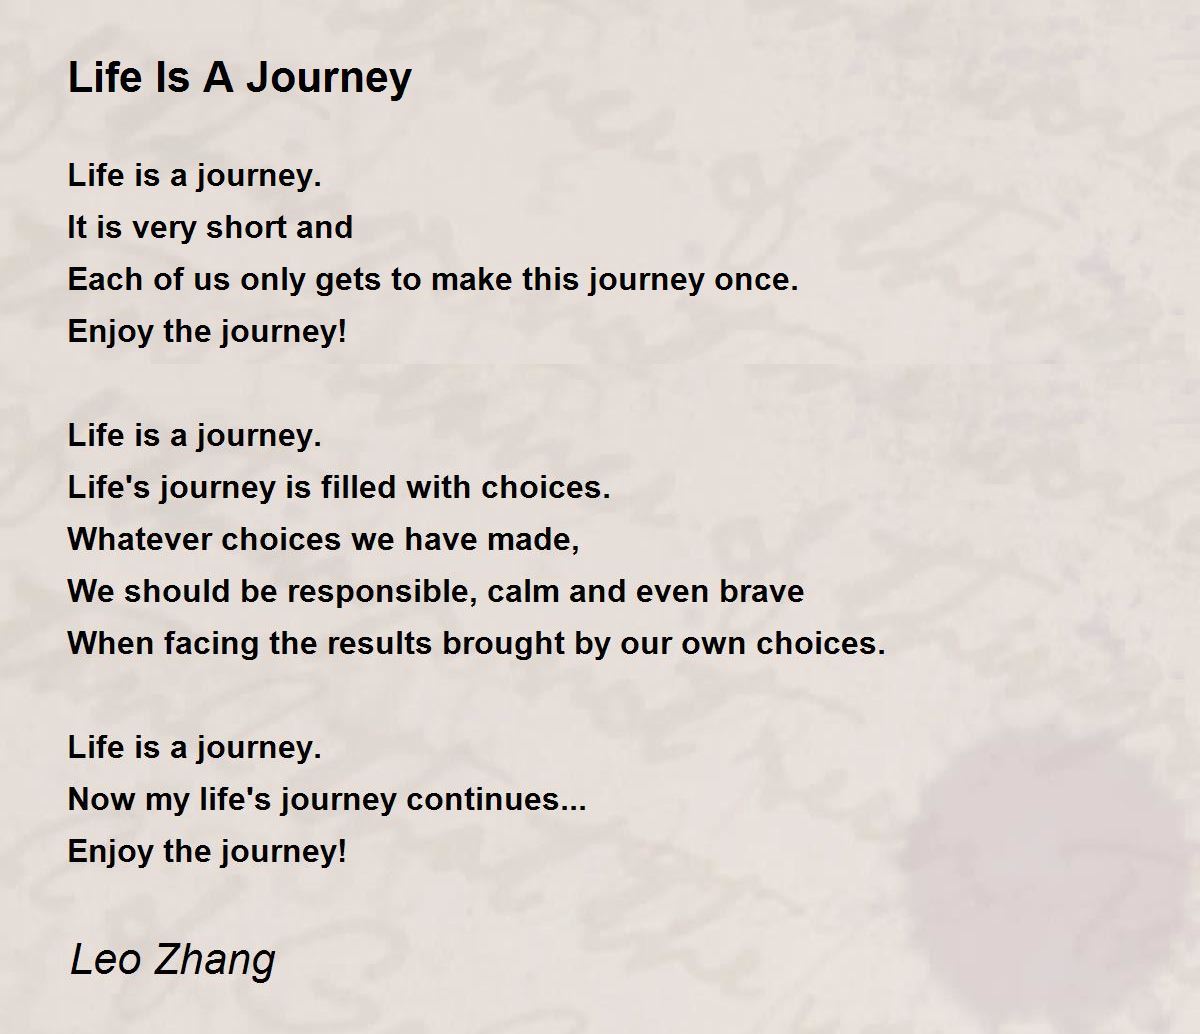 write an essay about life is a journey